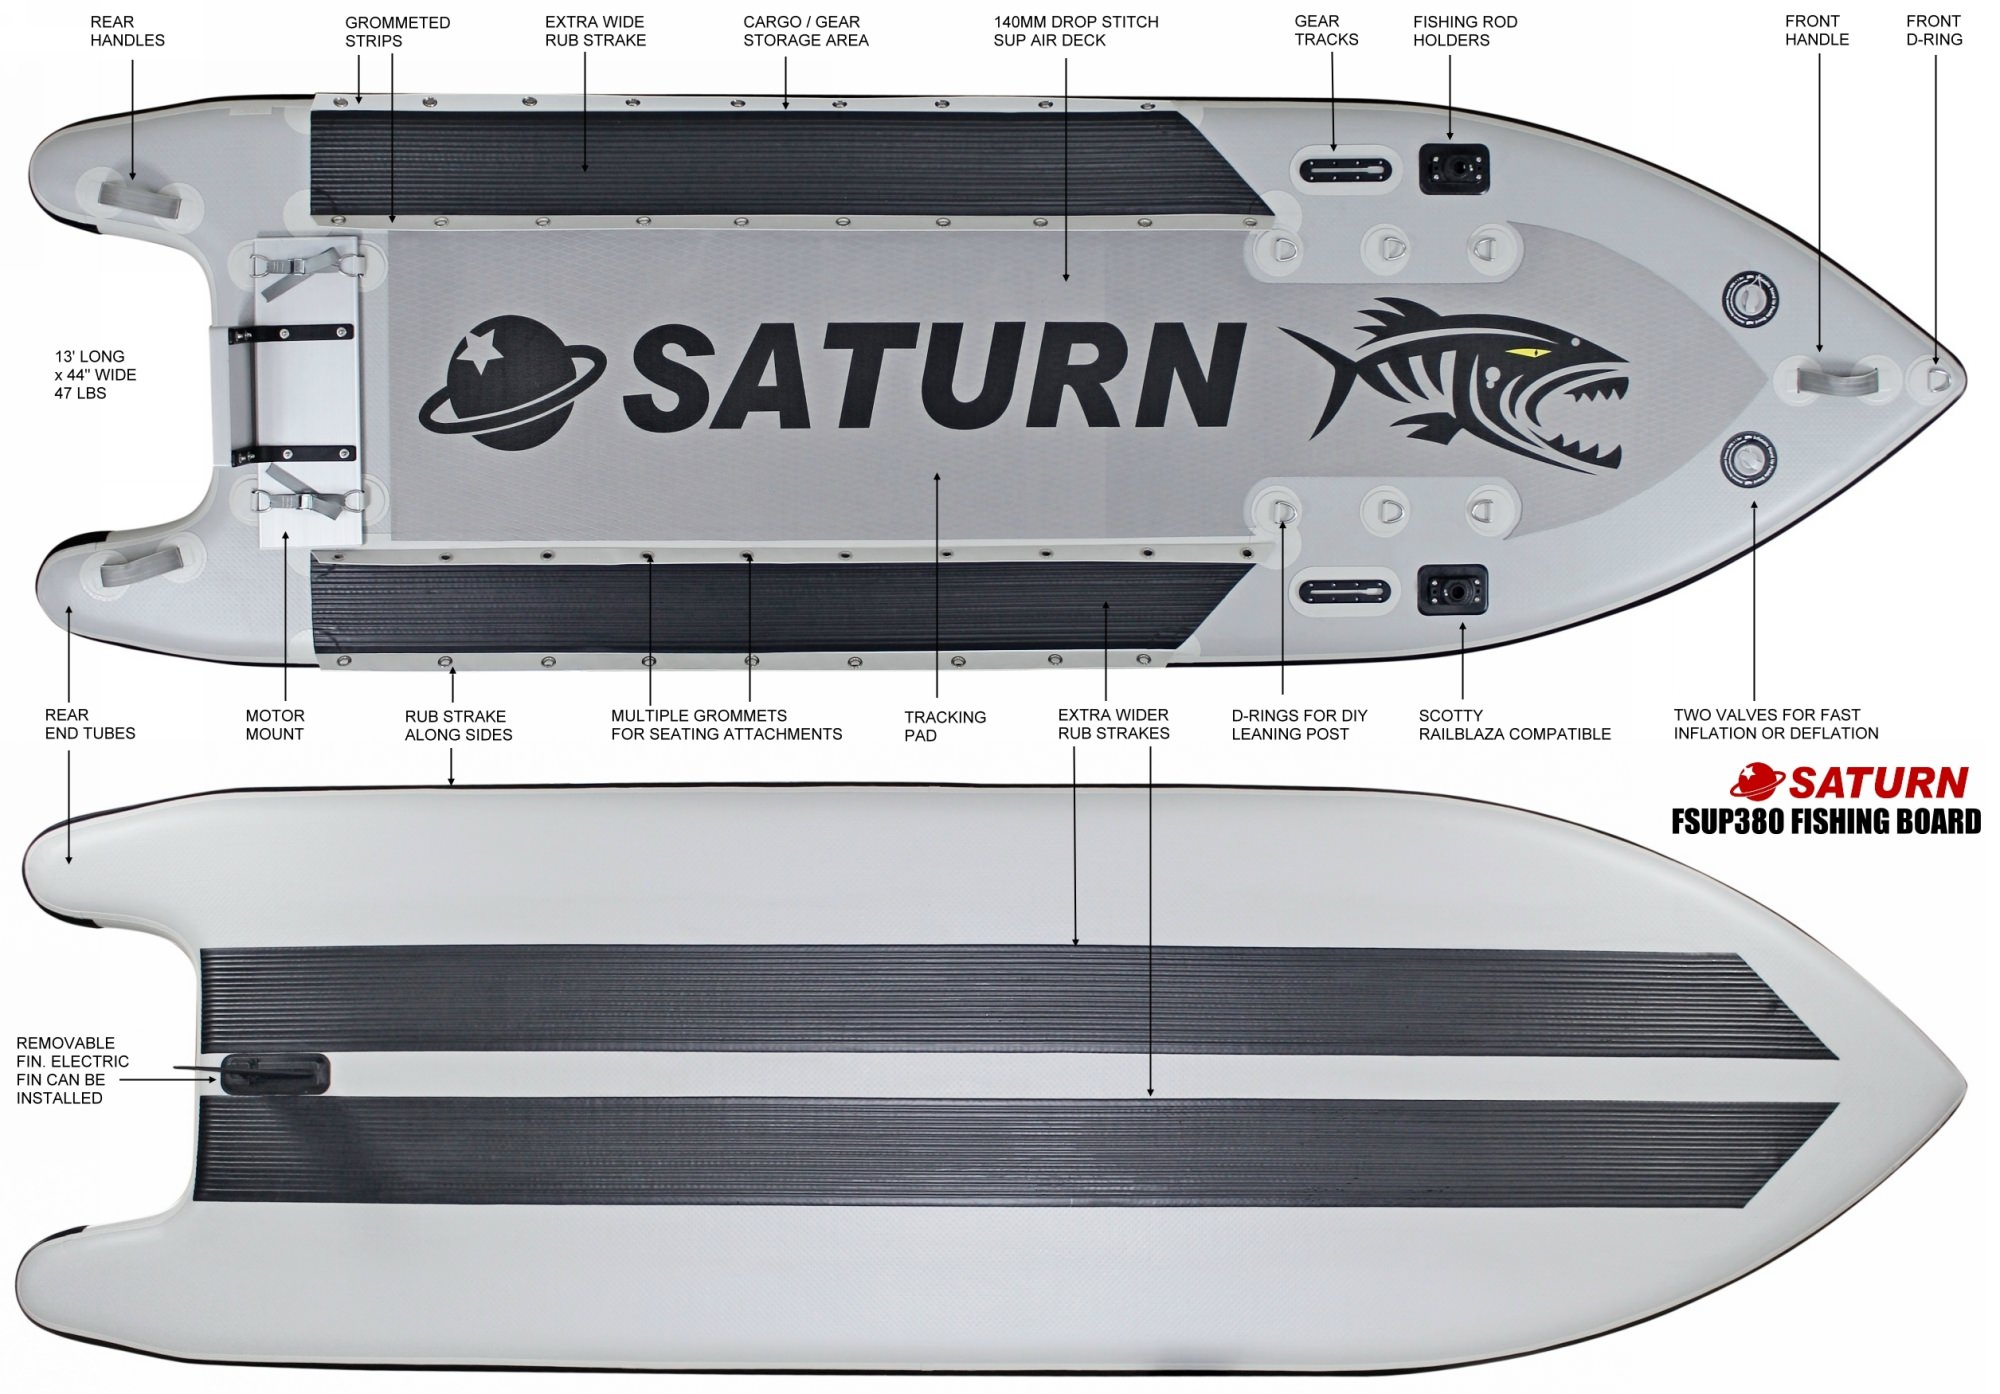 Saturn FSUP380 Fishing Inflatable Motor Boards Specifications